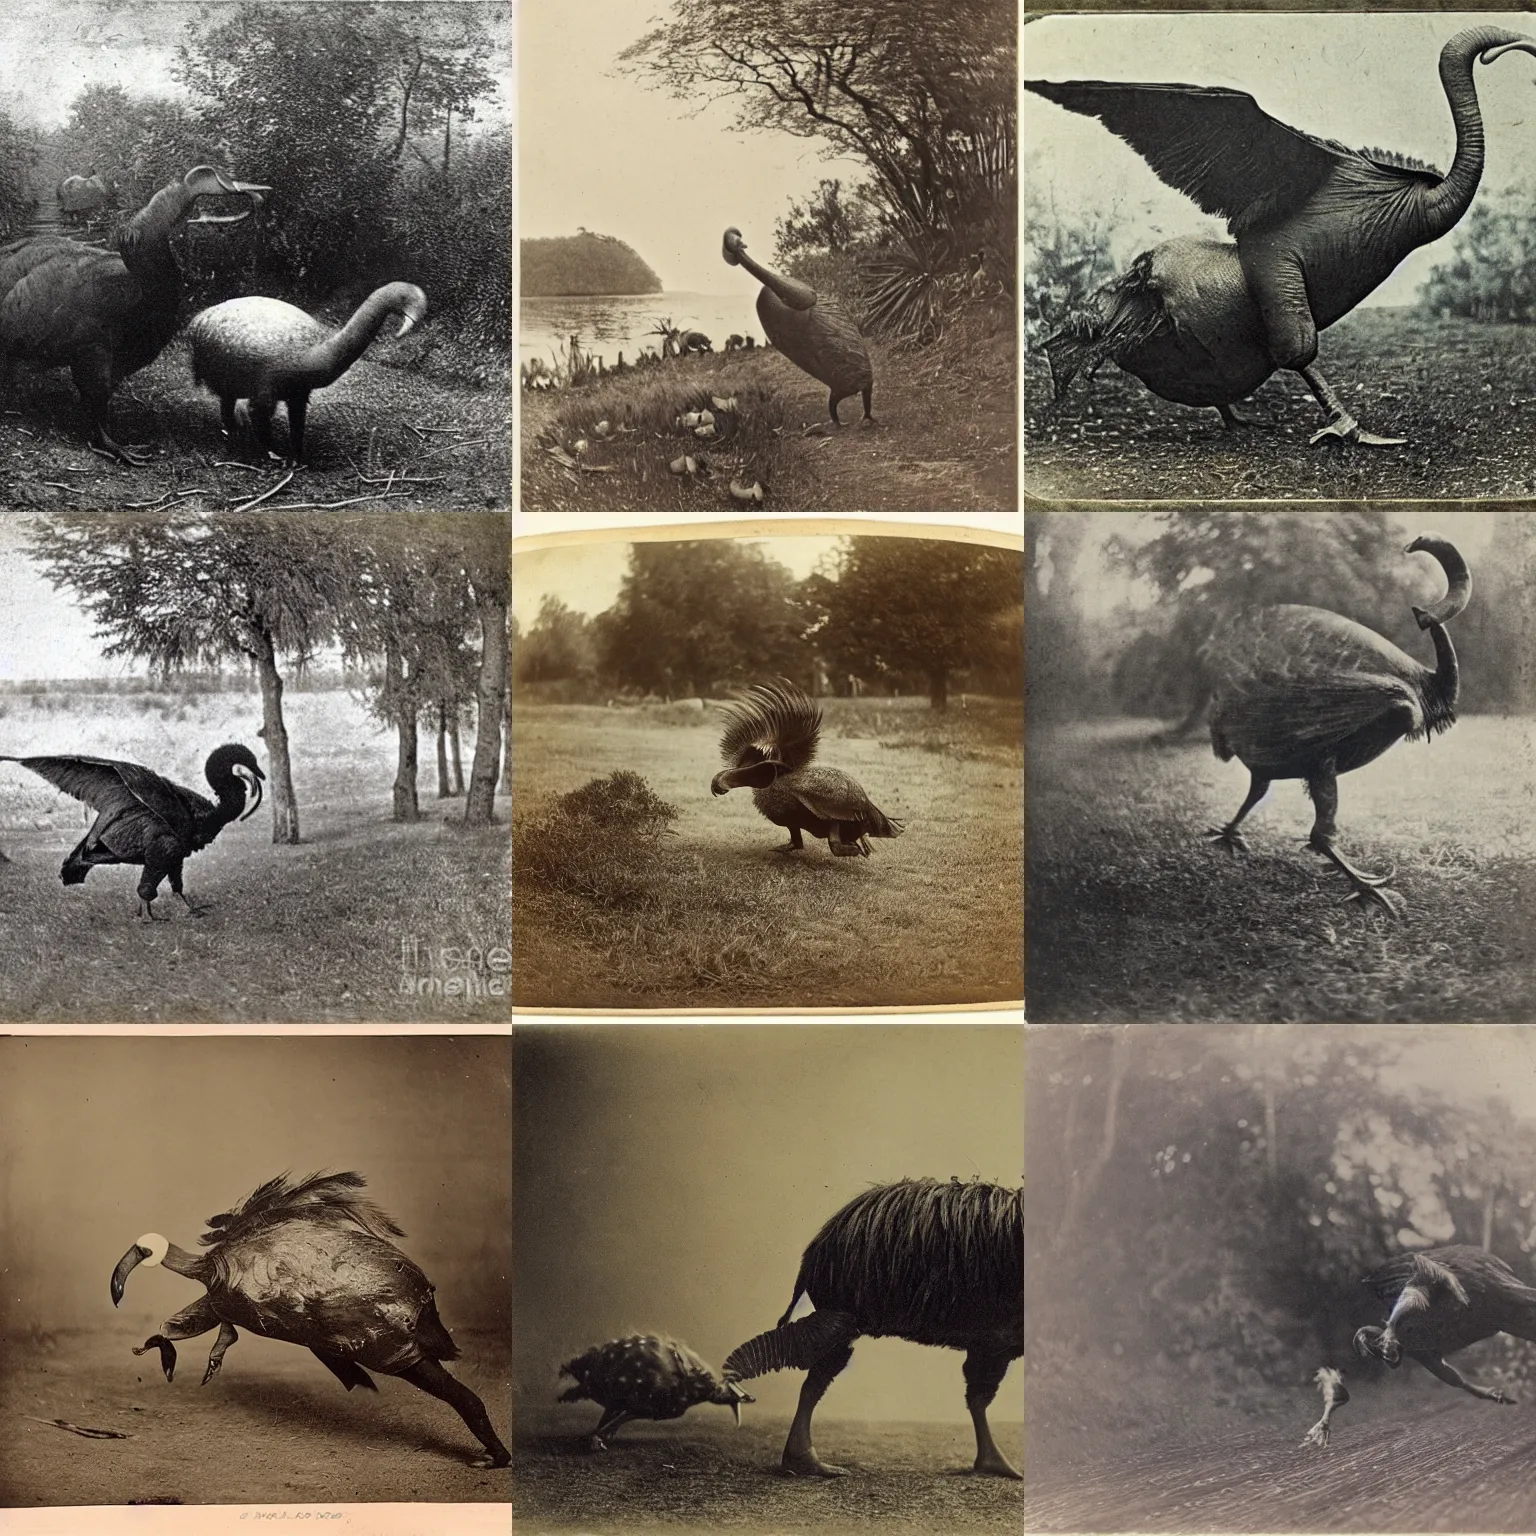 Prompt: 1 8 8 0 s photograph, a dodo being chased by a boar